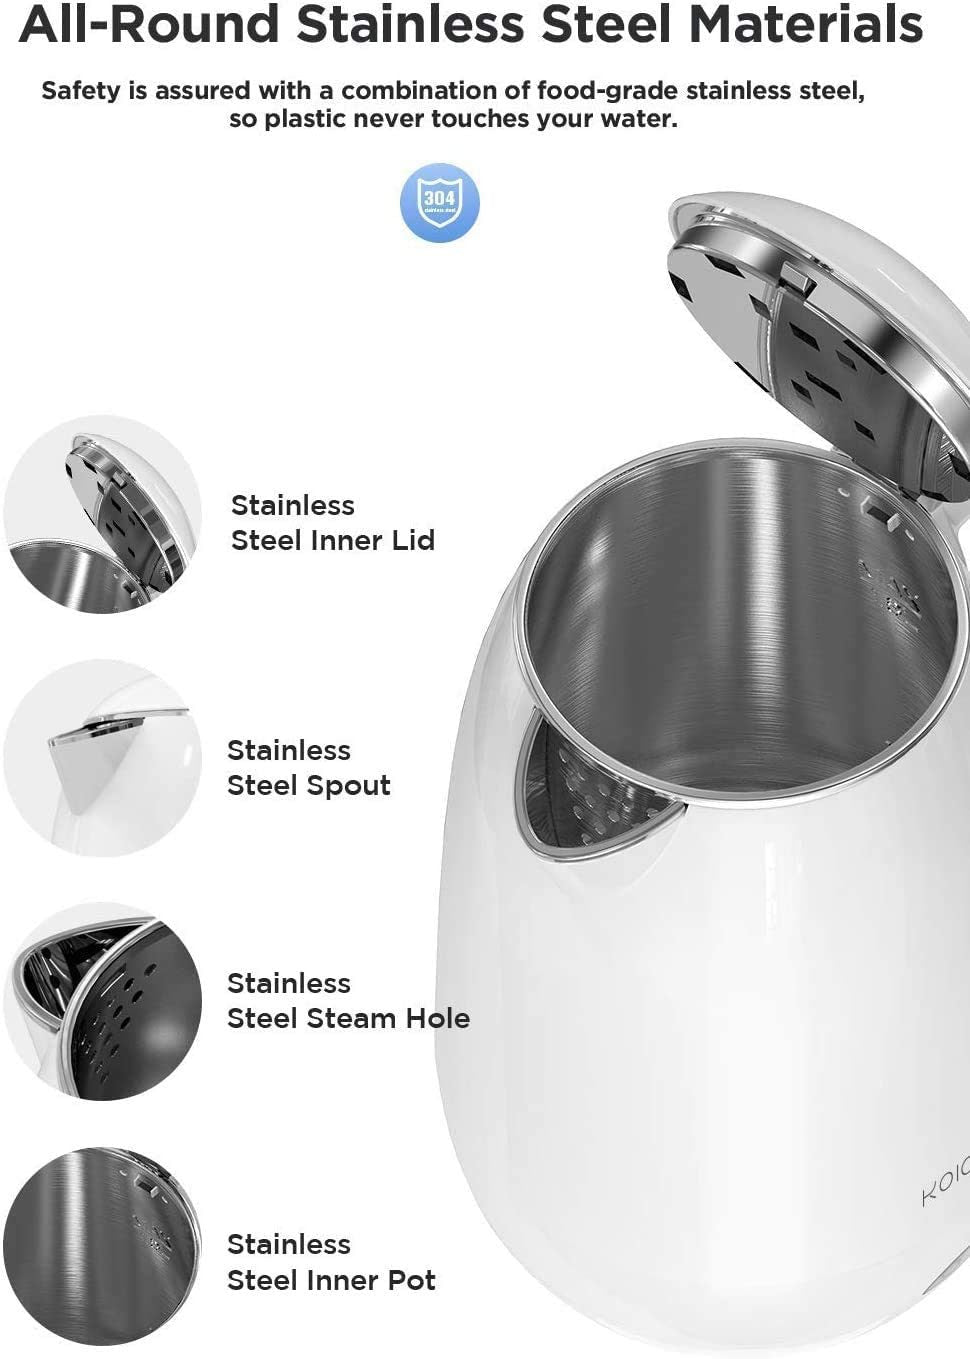 KOIOS 1.8L 304 Stainless Steel Hot Water Boiler, Double Wall Electric Tea Kettle